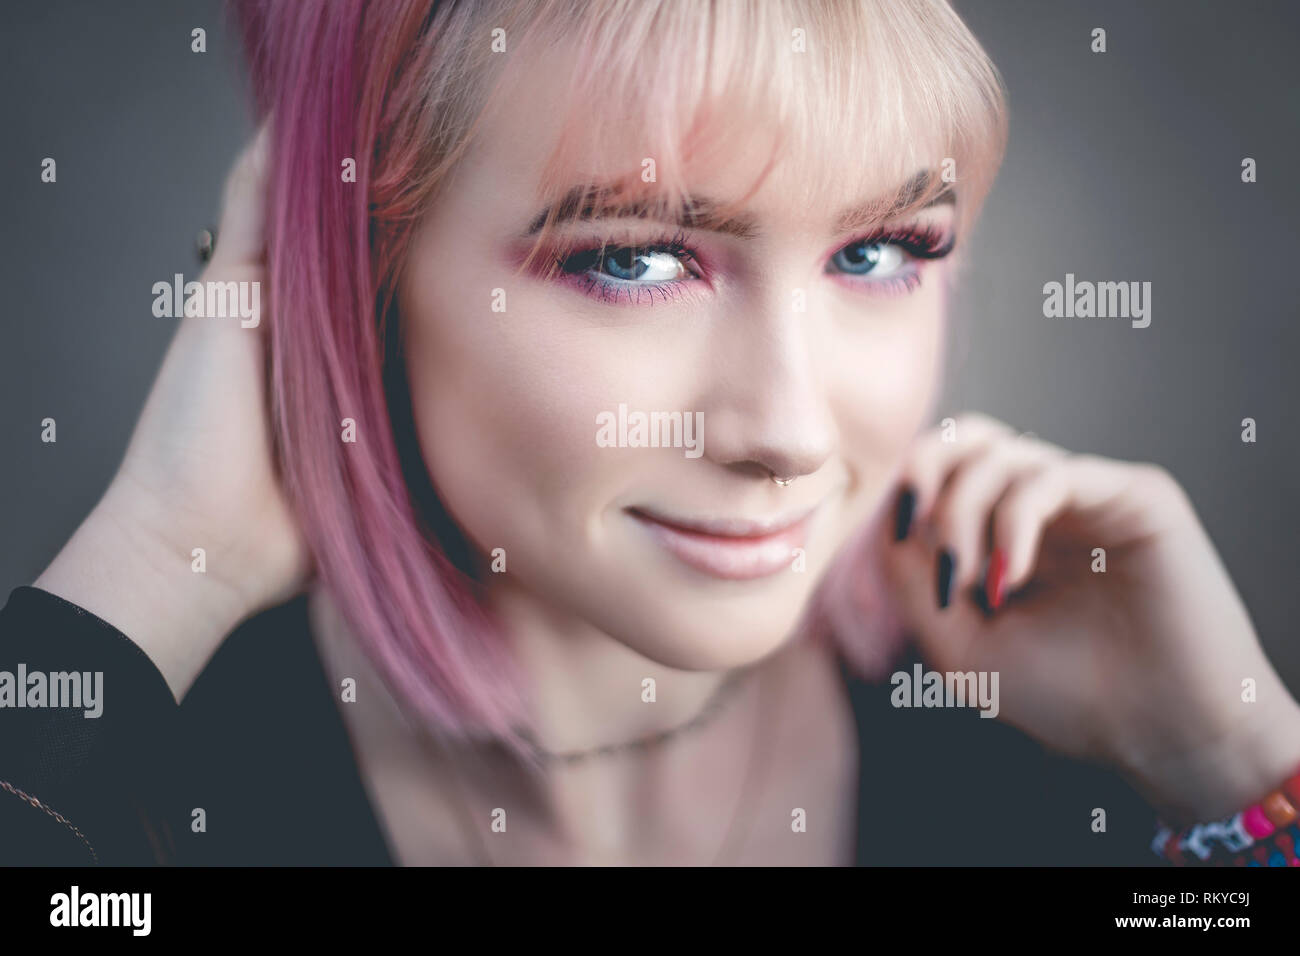 Portrait of teen girl with pink hair and pierced nose looking at camera. Stock Photo